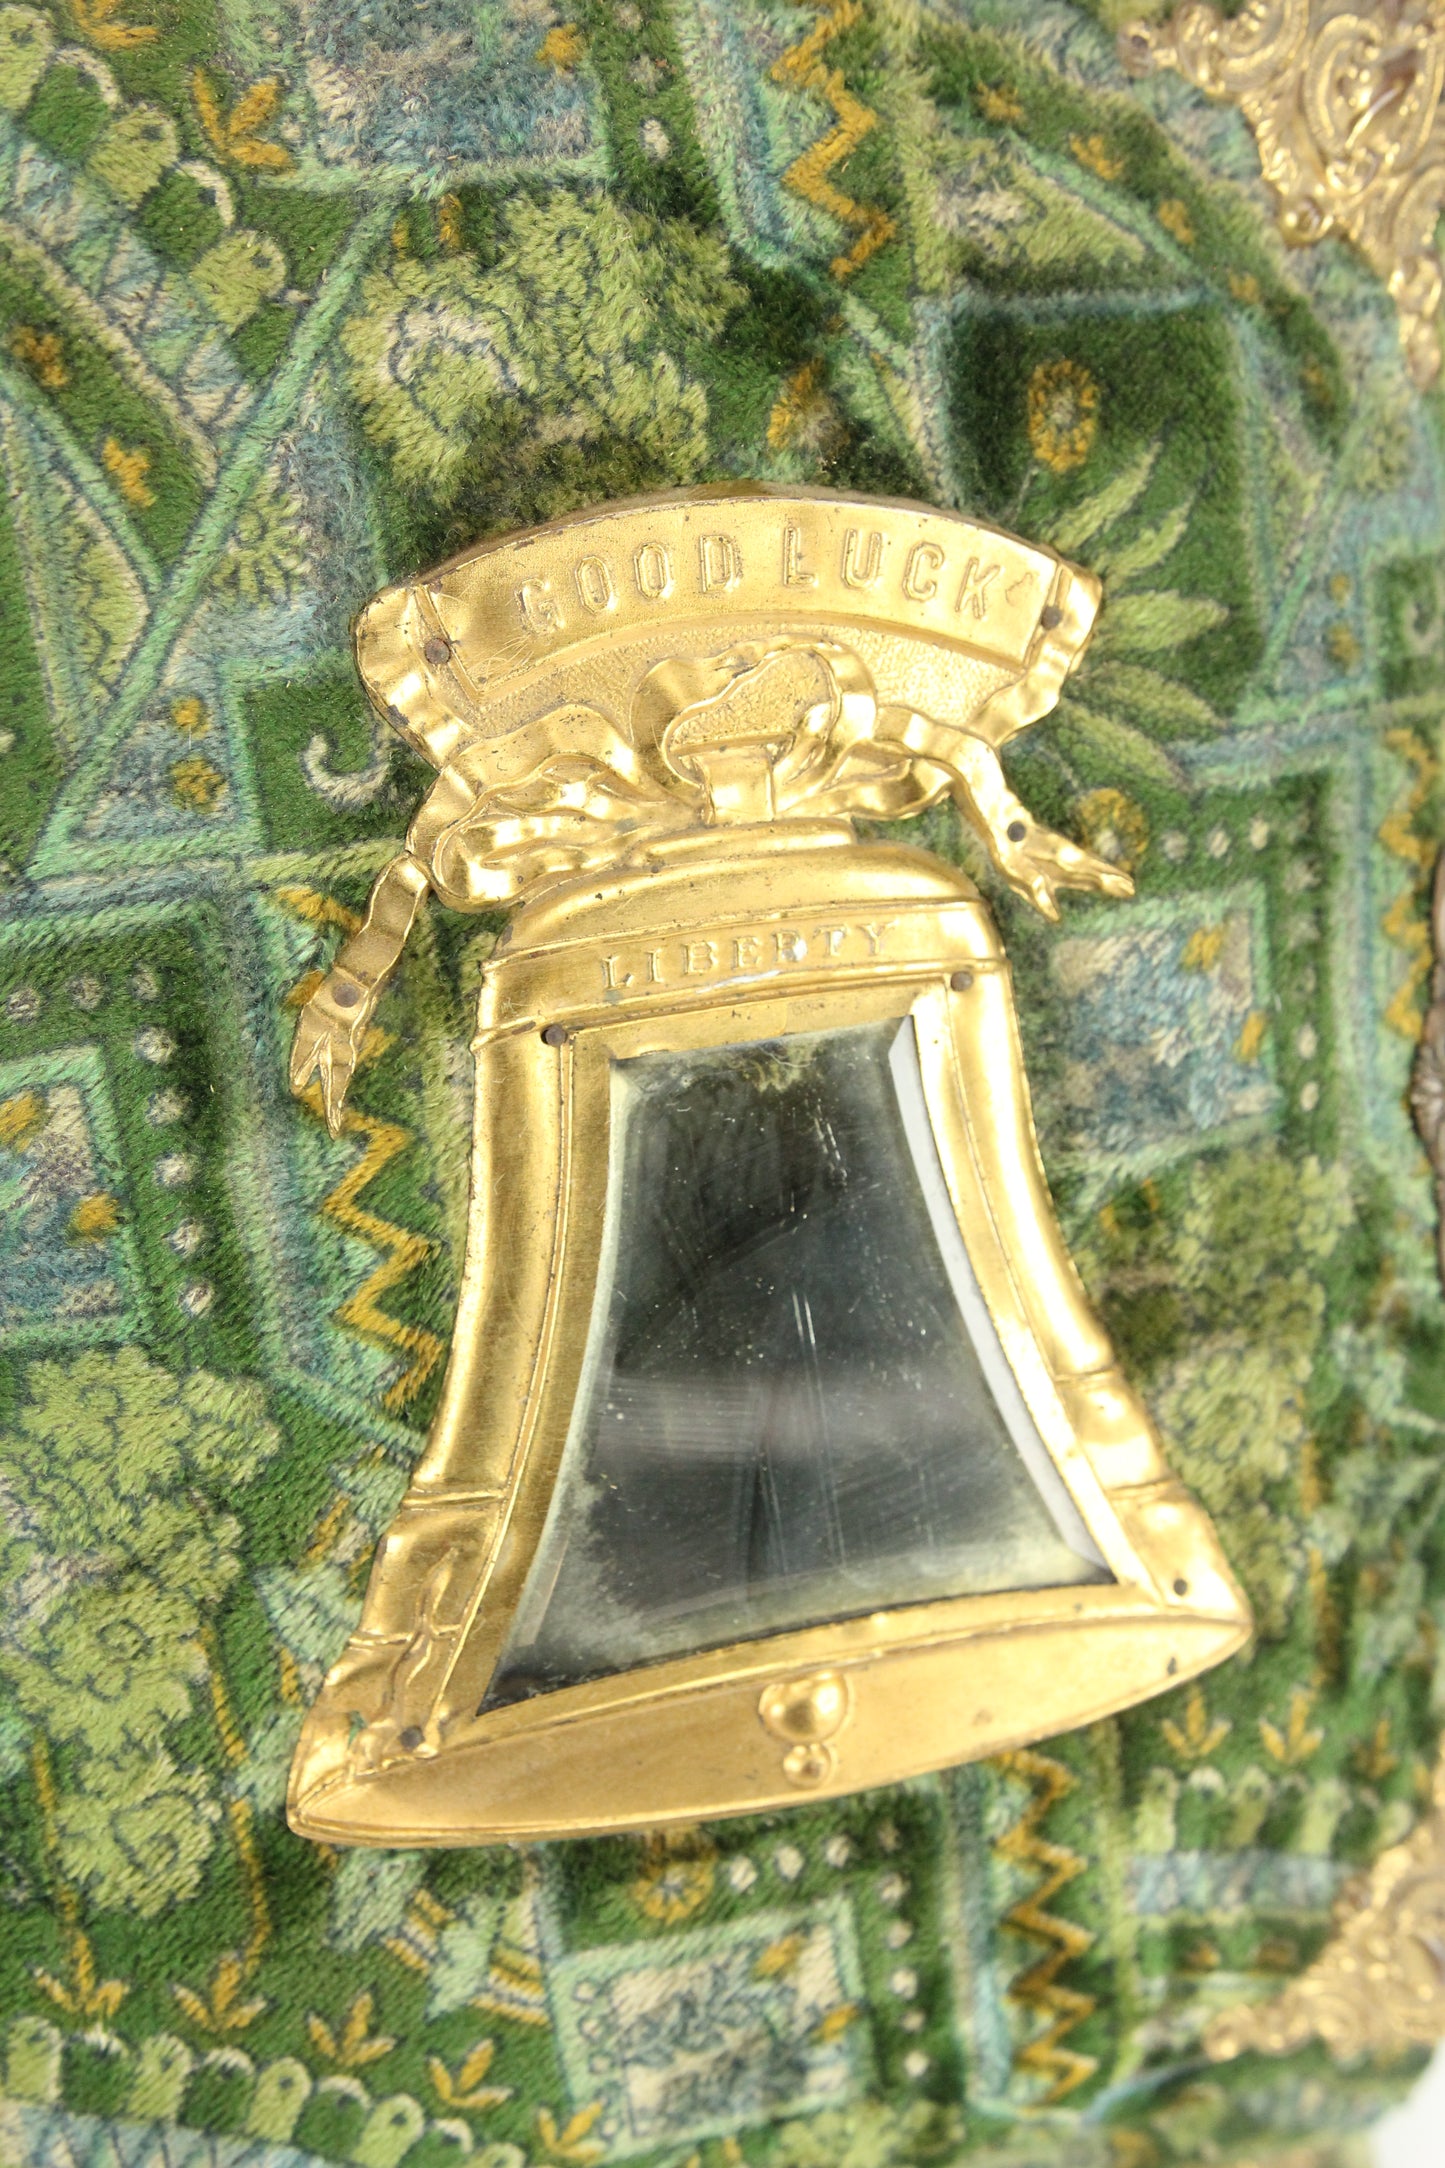 Victorian Liberty Bell Mirrored Green Fabric Covered Cabinet Card Photo Album